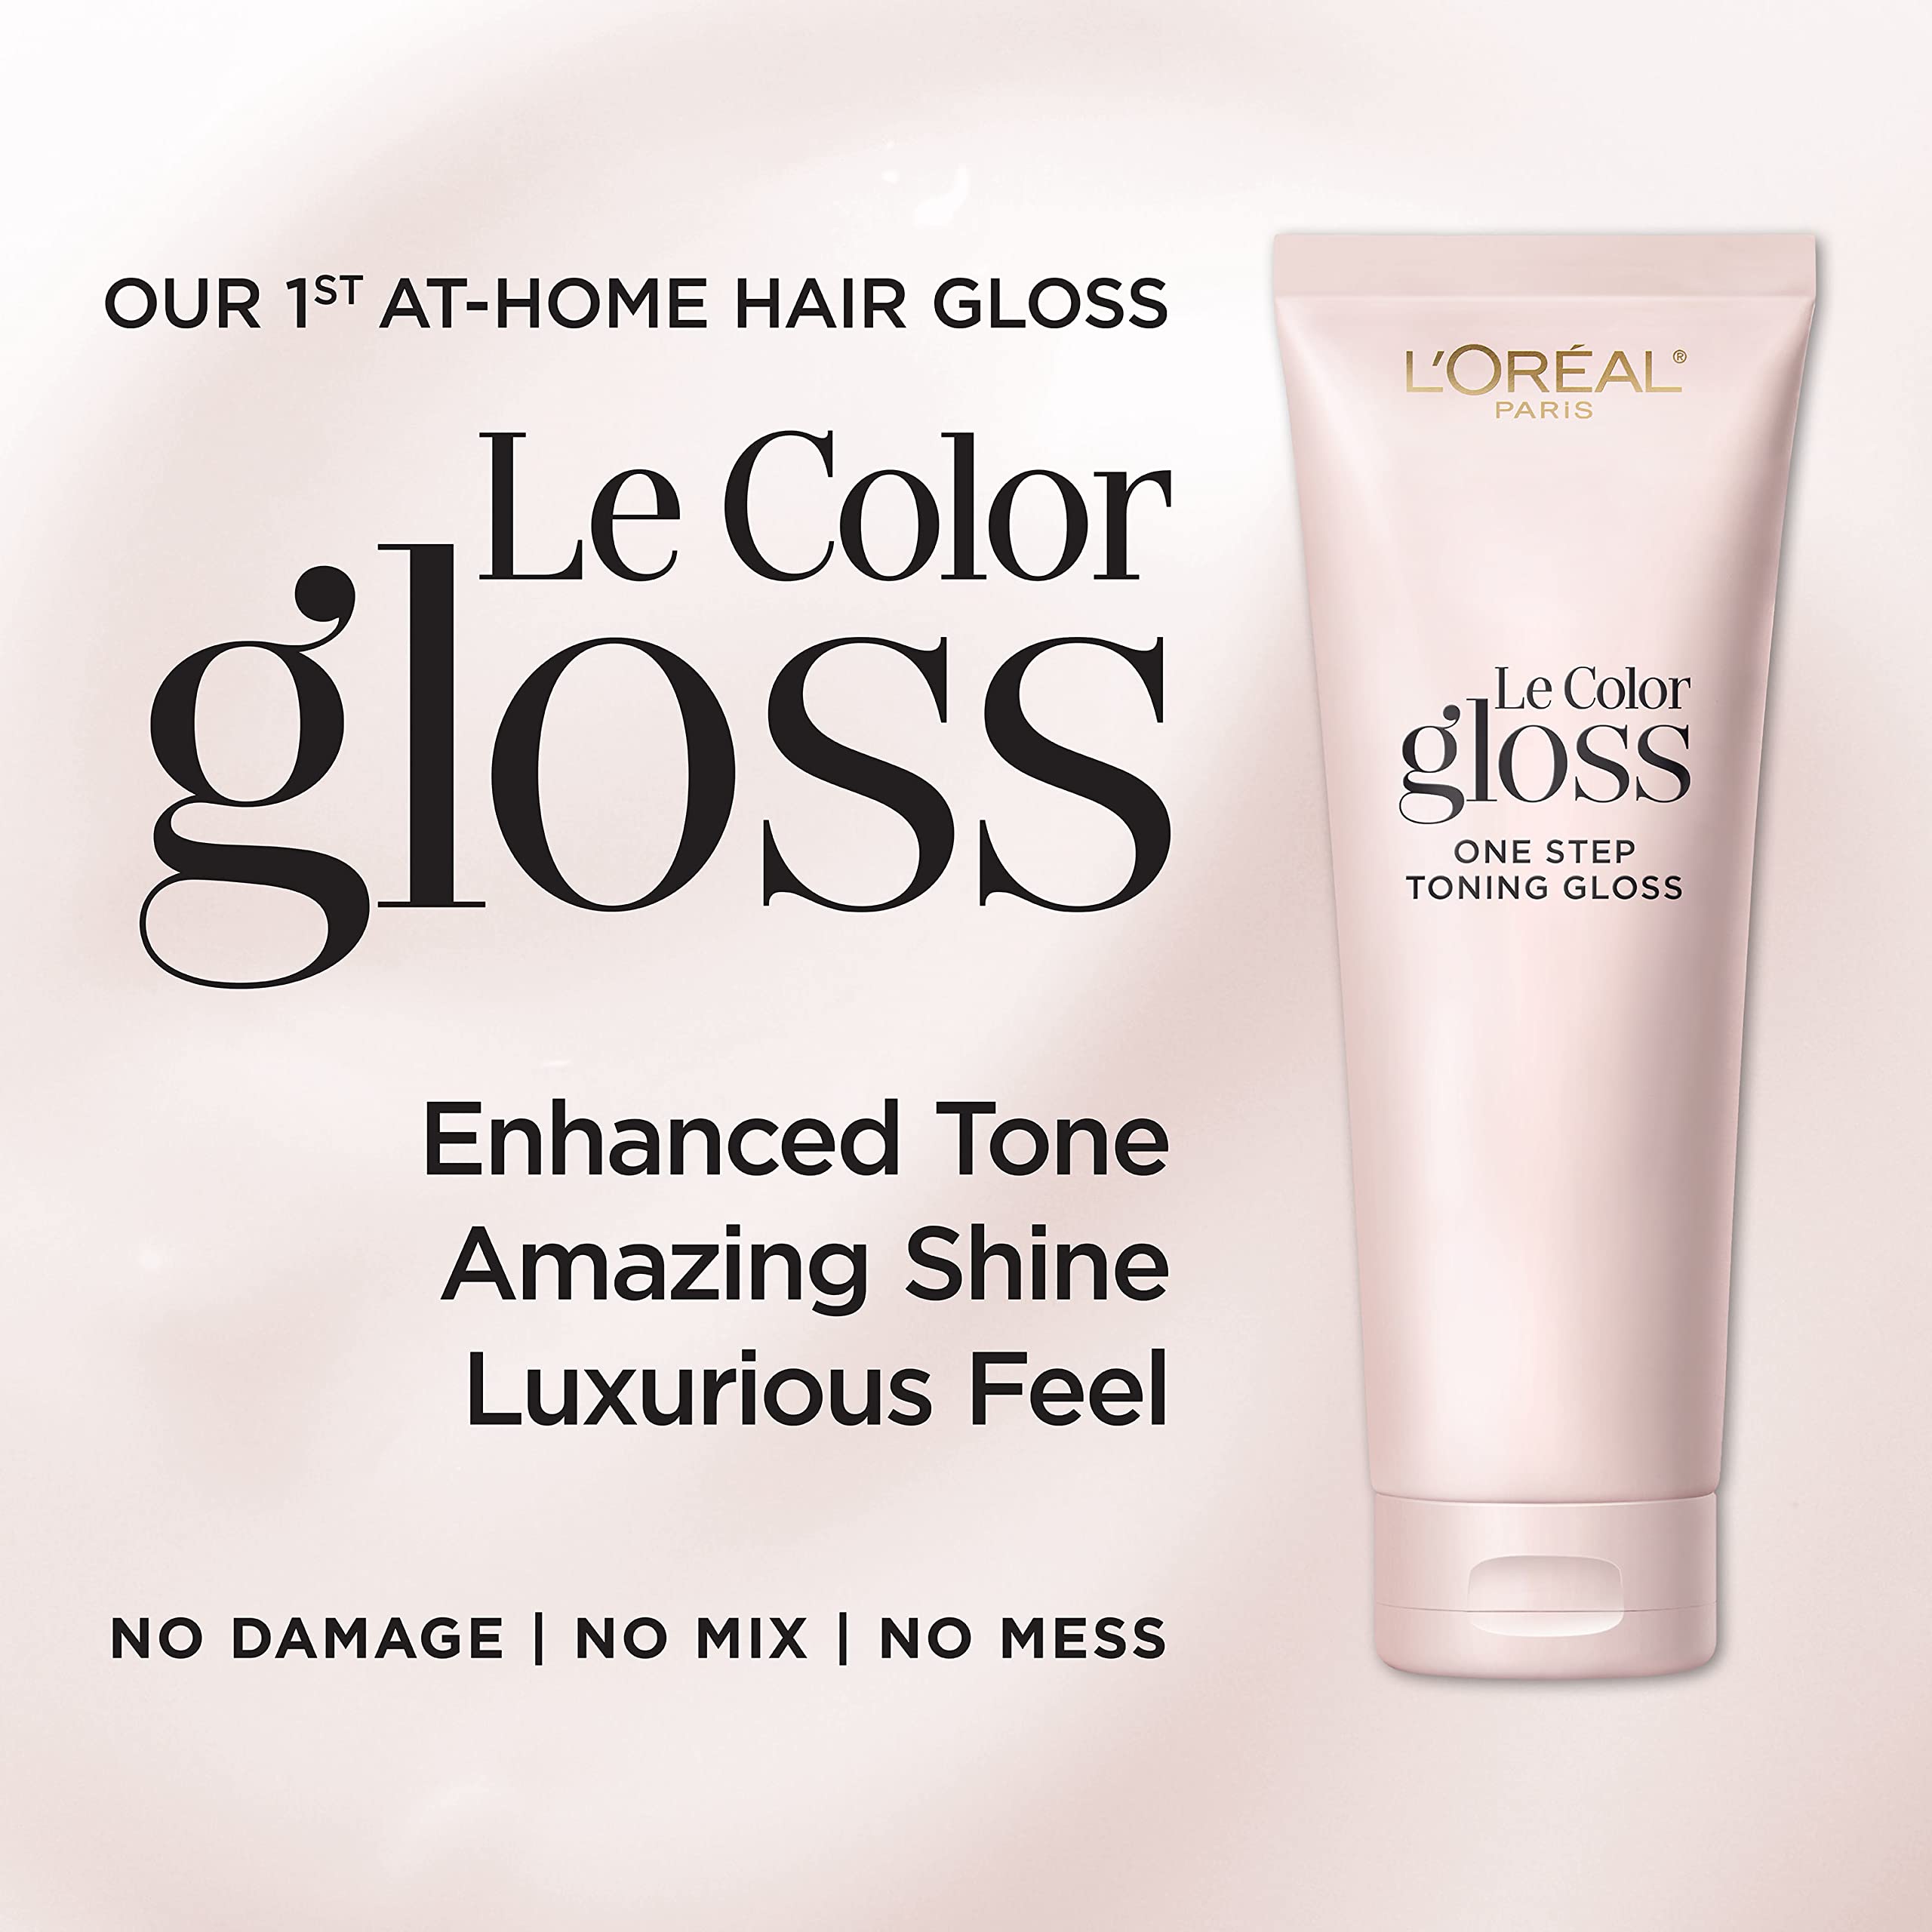 L’Oréal Paris Le Color Gloss One Step In-Shower Toning Hair Gloss, Neutralizes Brass, Conditions & Boosts Shine, Silver, 4 Ounce